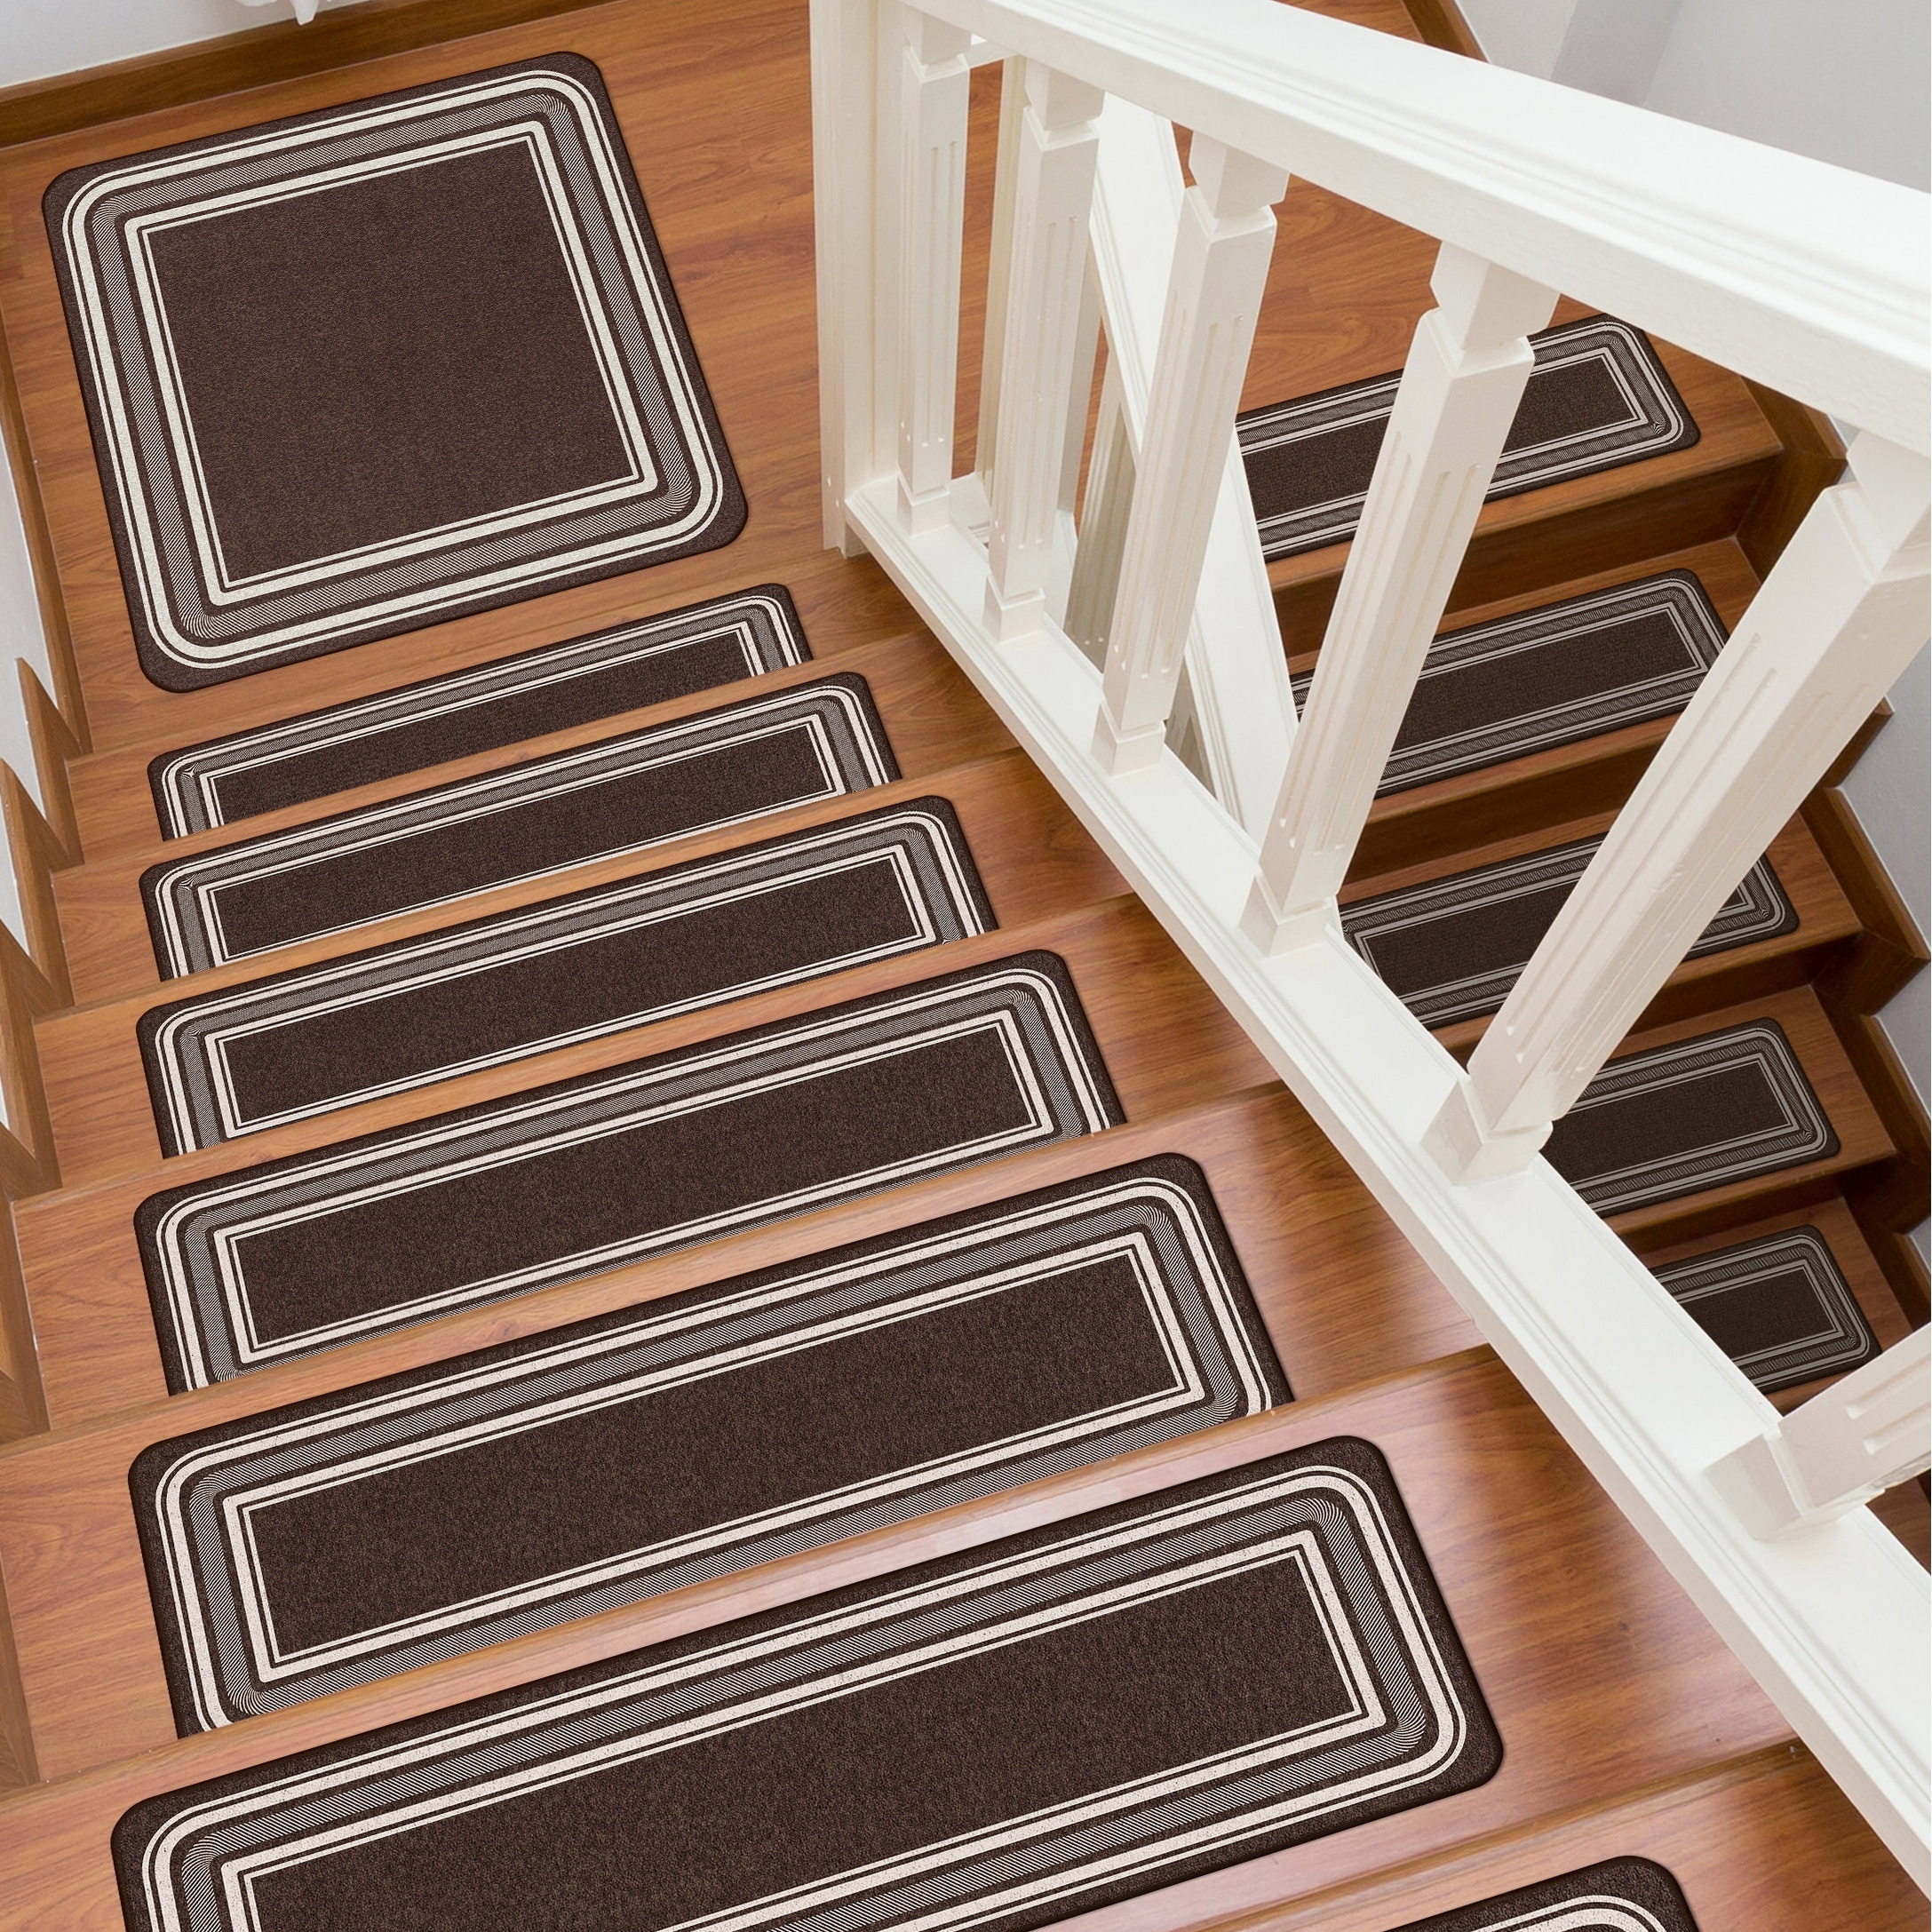 https://ak1.ostkcdn.com/images/products/is/images/direct/427a8a8e2a654cfd303c54431eb438af225d0af1/Beverly-Rug-Non-Slip-Bordered-Stair-Treads-w--Matching-Landing-Mat.jpg